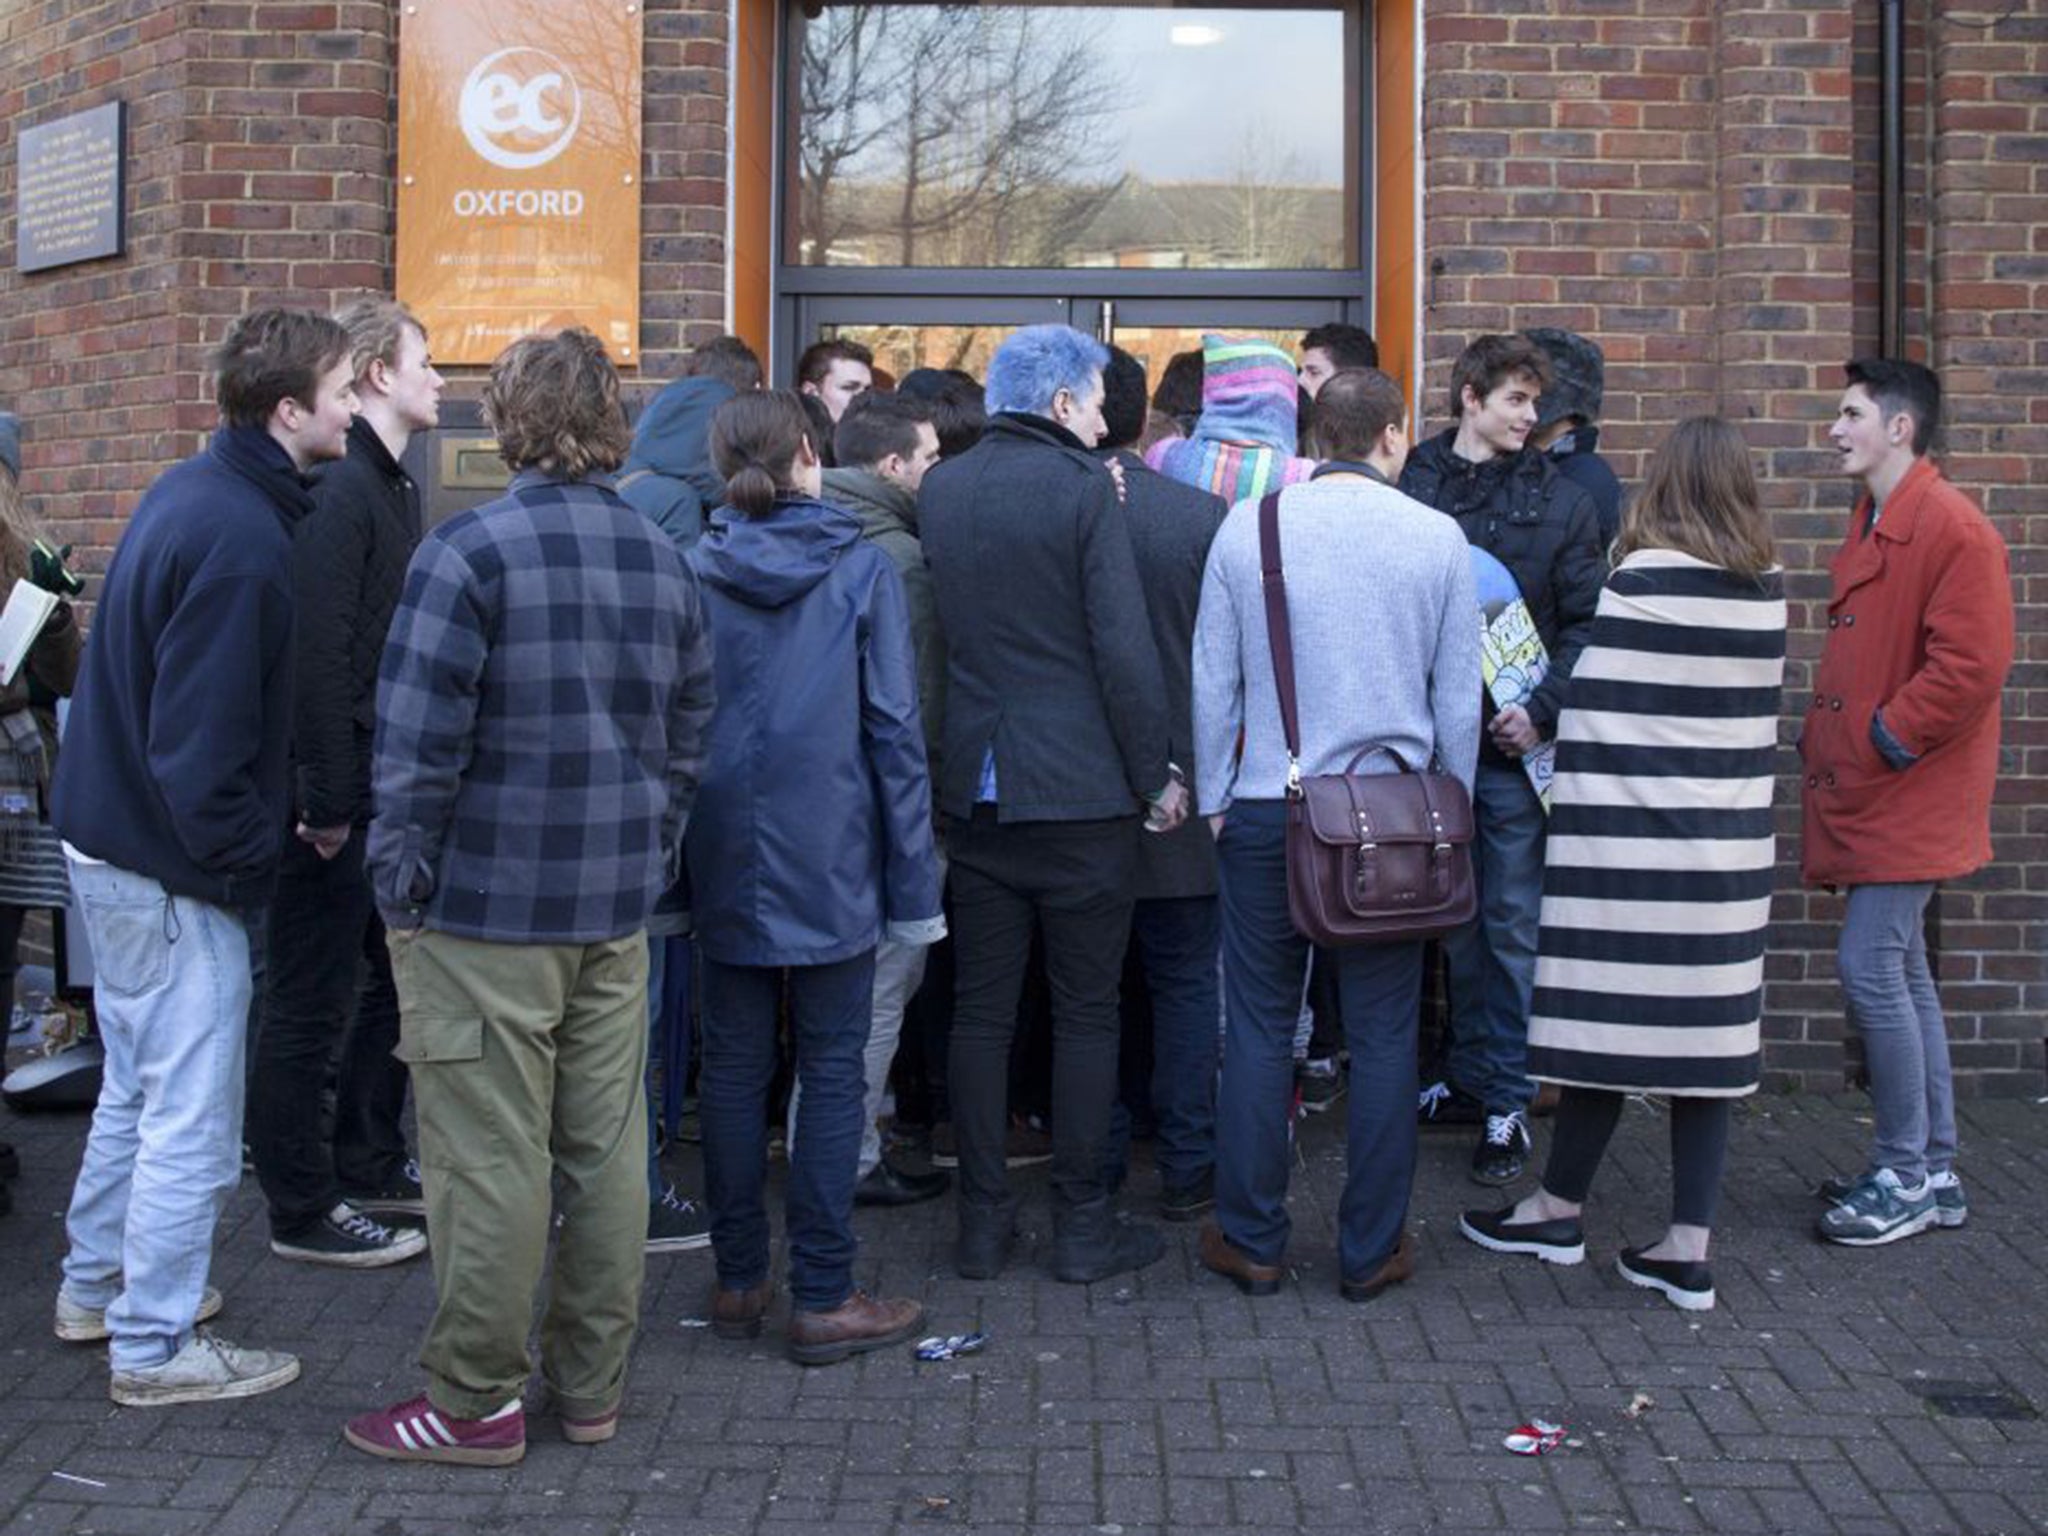 Word spread quickly and by Friday afternoon hordes had congregated outside the college